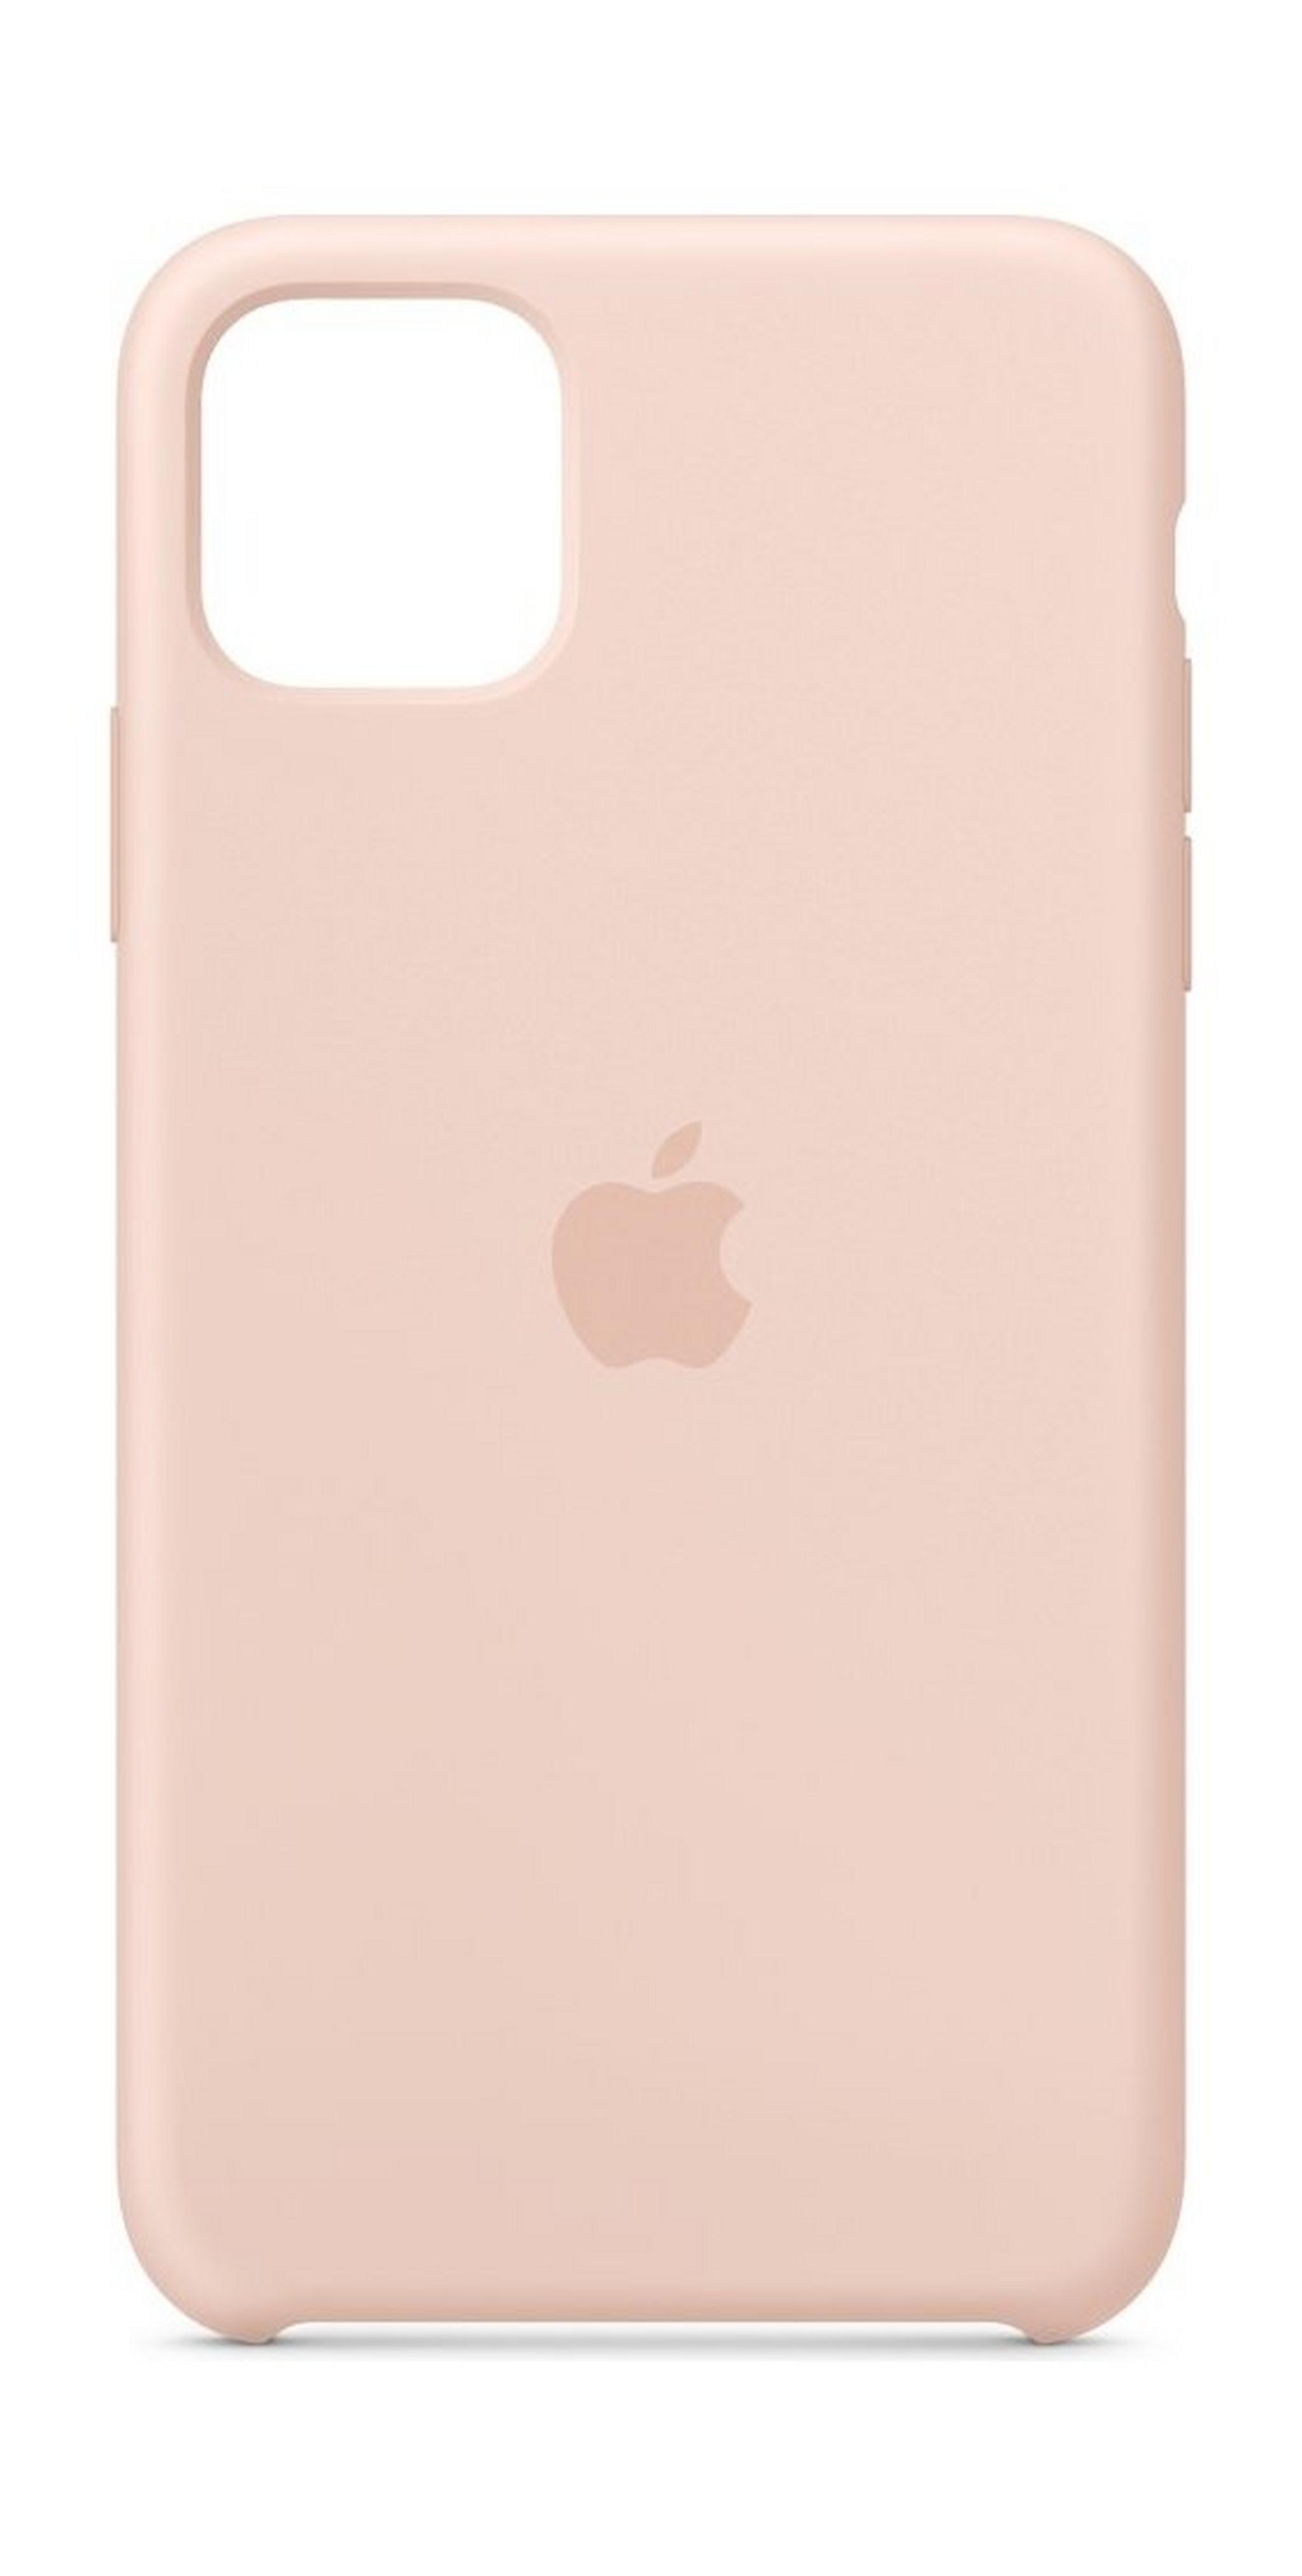 Apple iPhone 11 Pro Max Silicon Case - Pink Sand